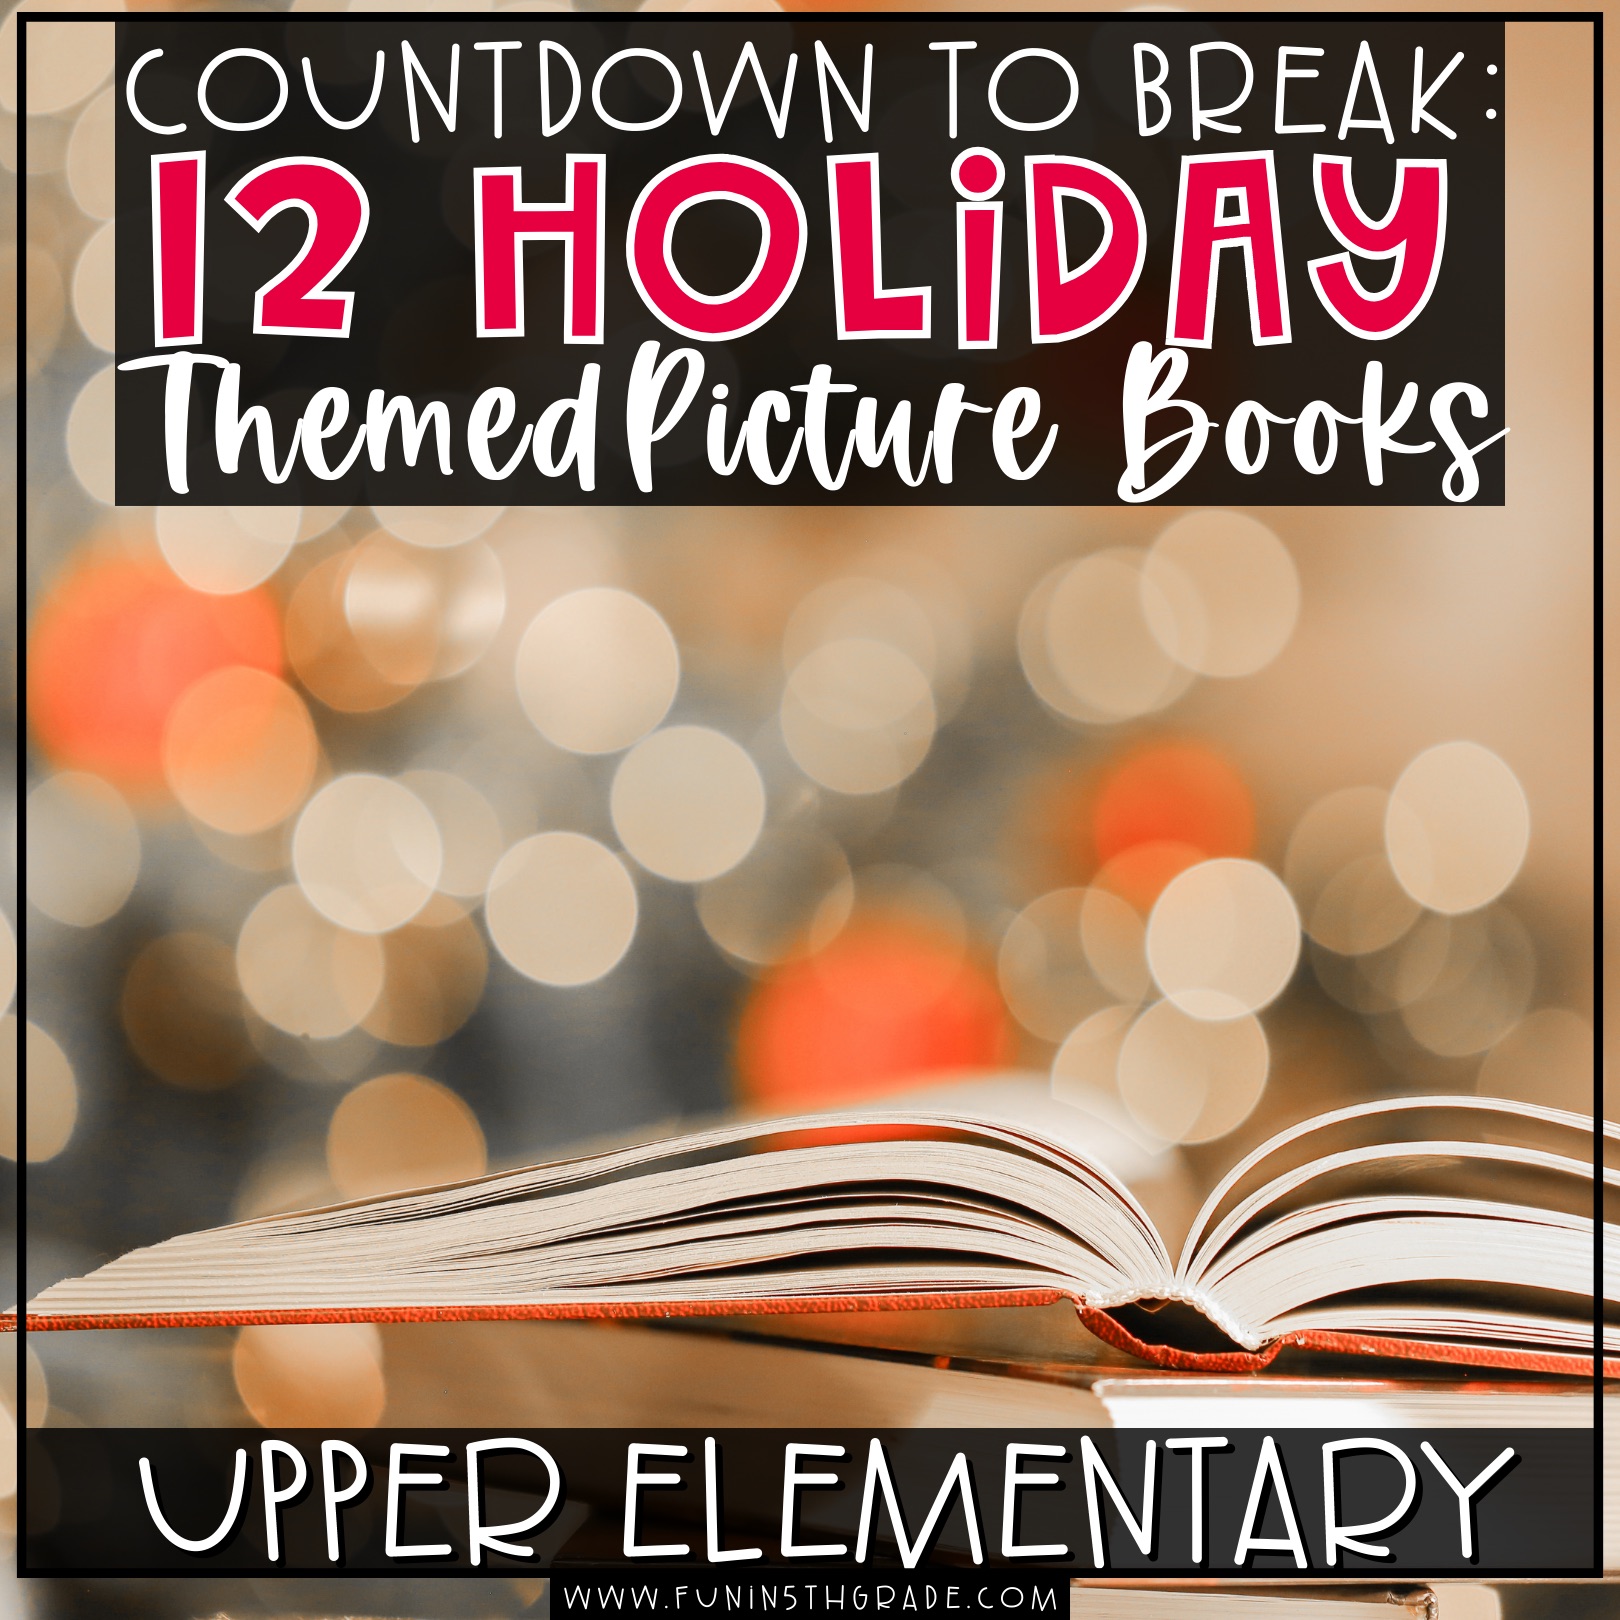 Holiday Picture Books for Read-Aloud: Countdown to Break